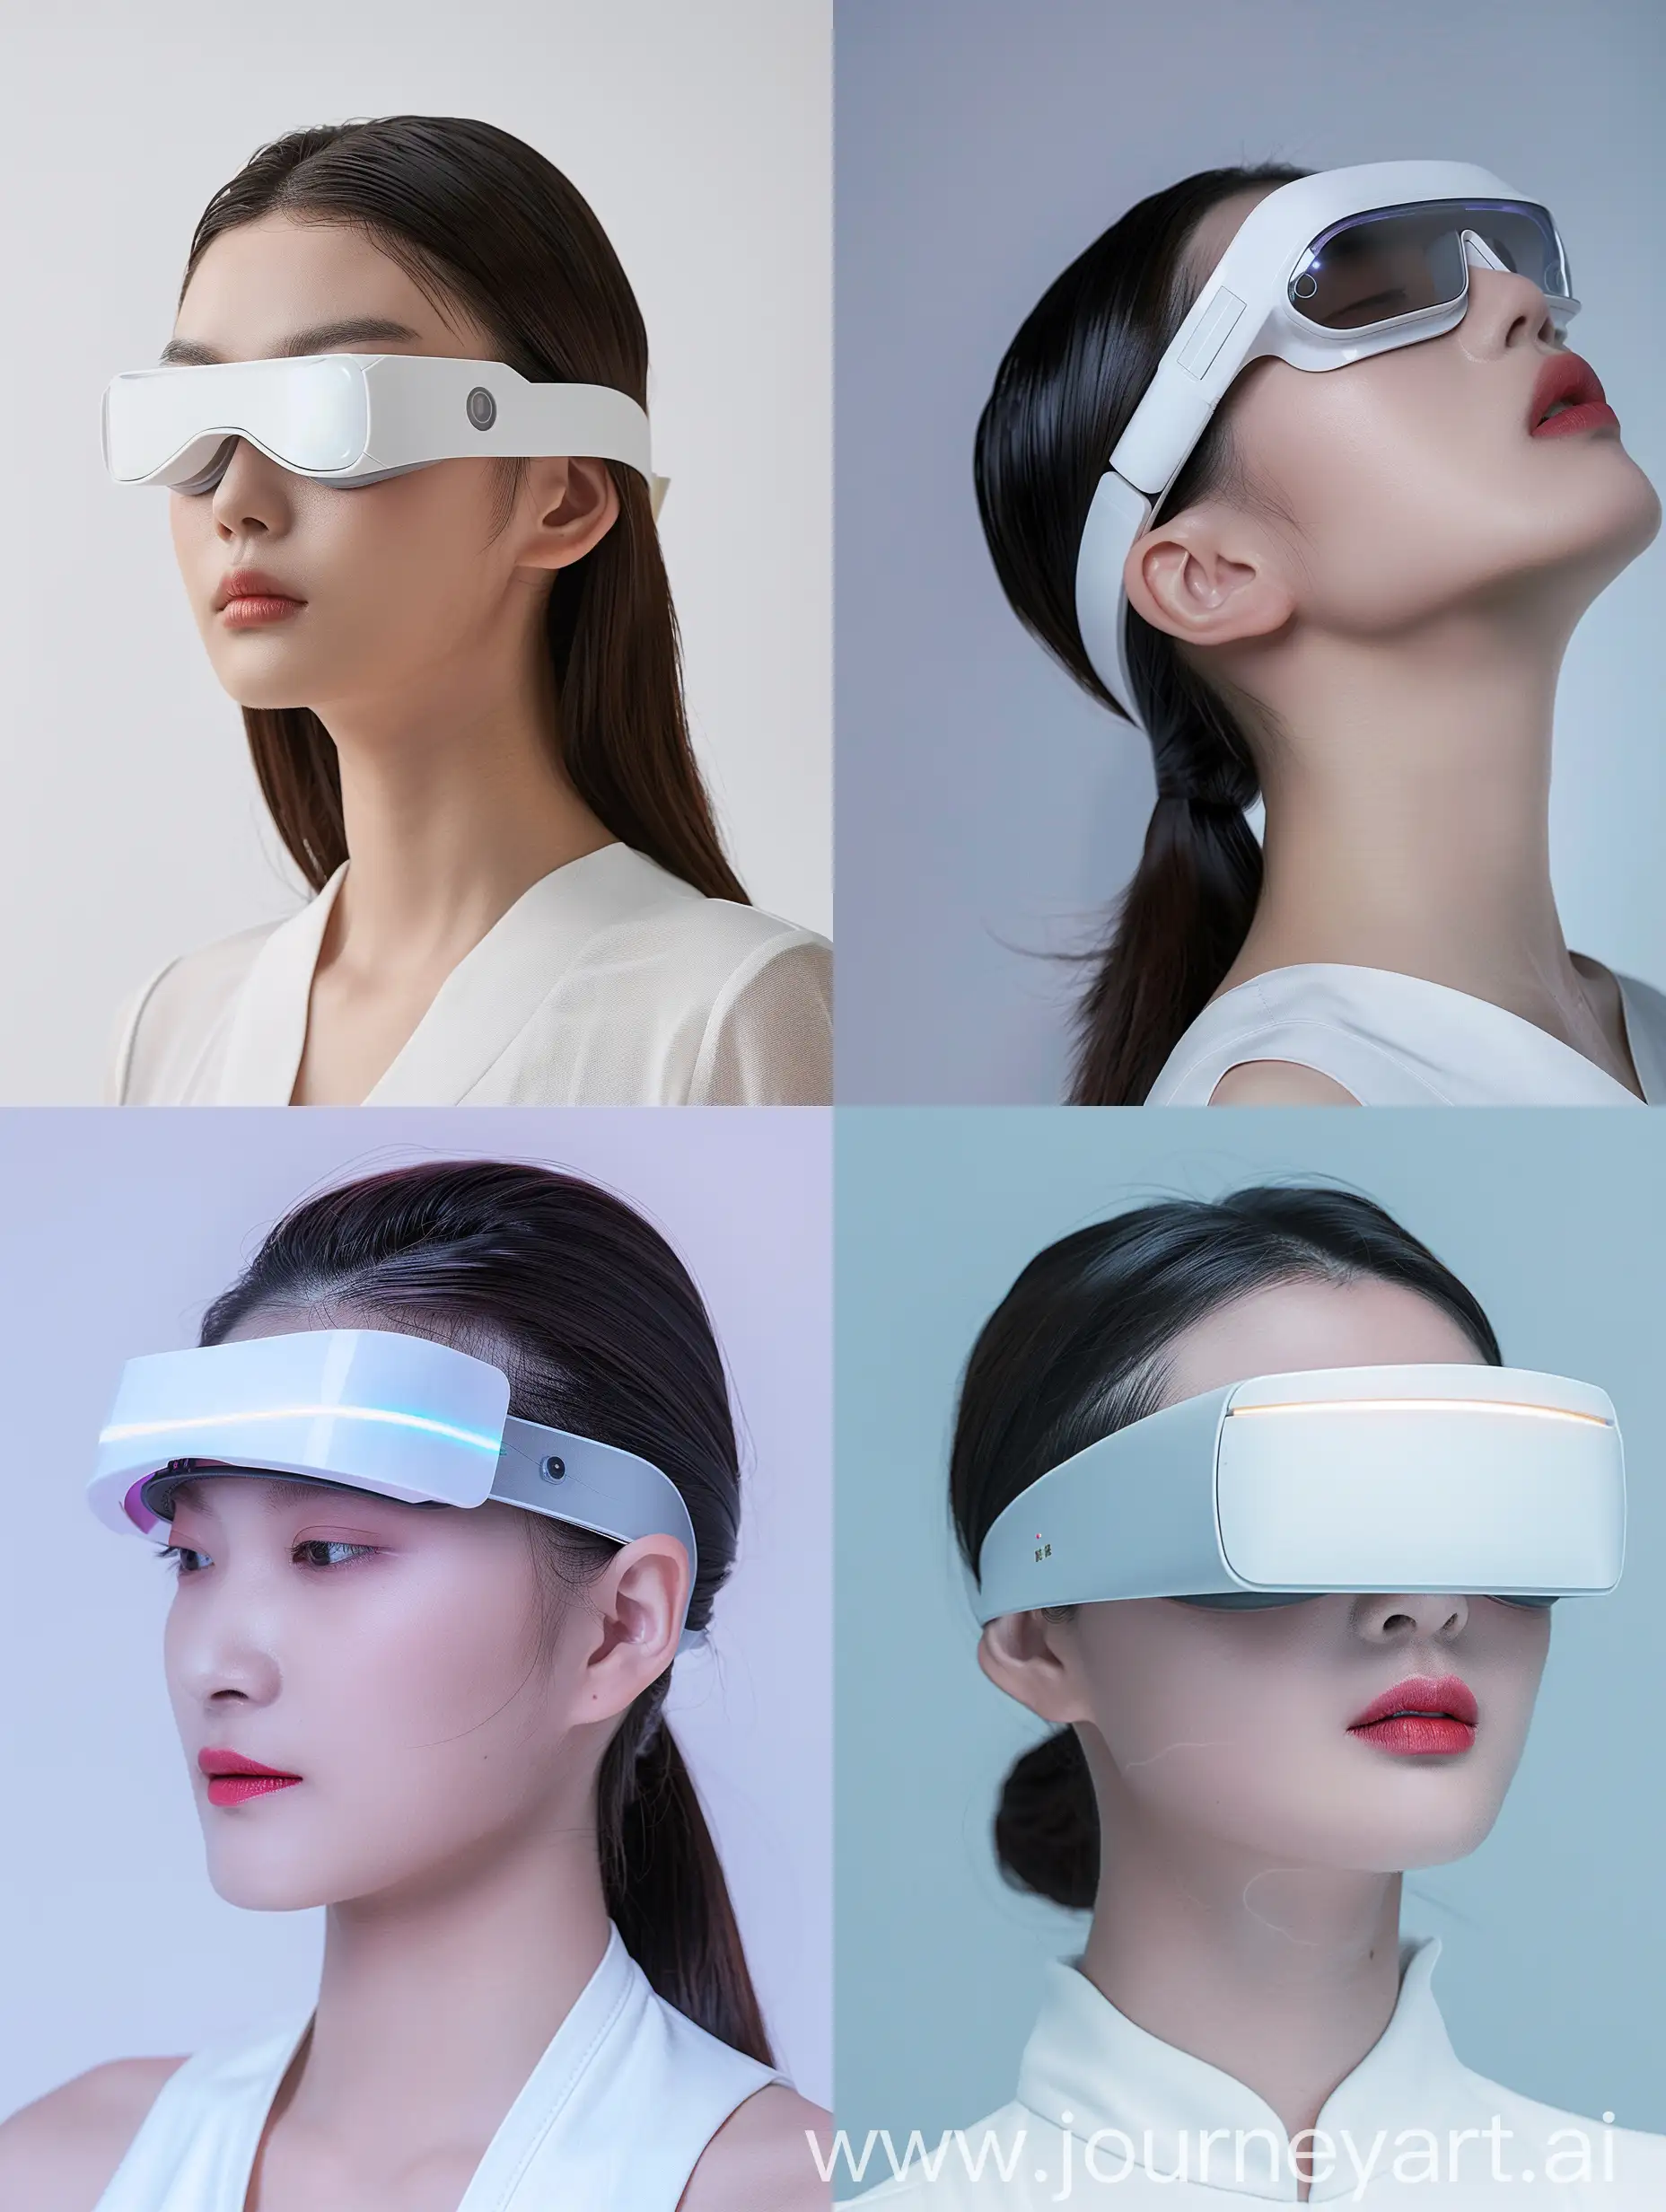 Modern-Portable-Laser-Therapy-Headgear-for-Eye-Head-and-Neck-Relief